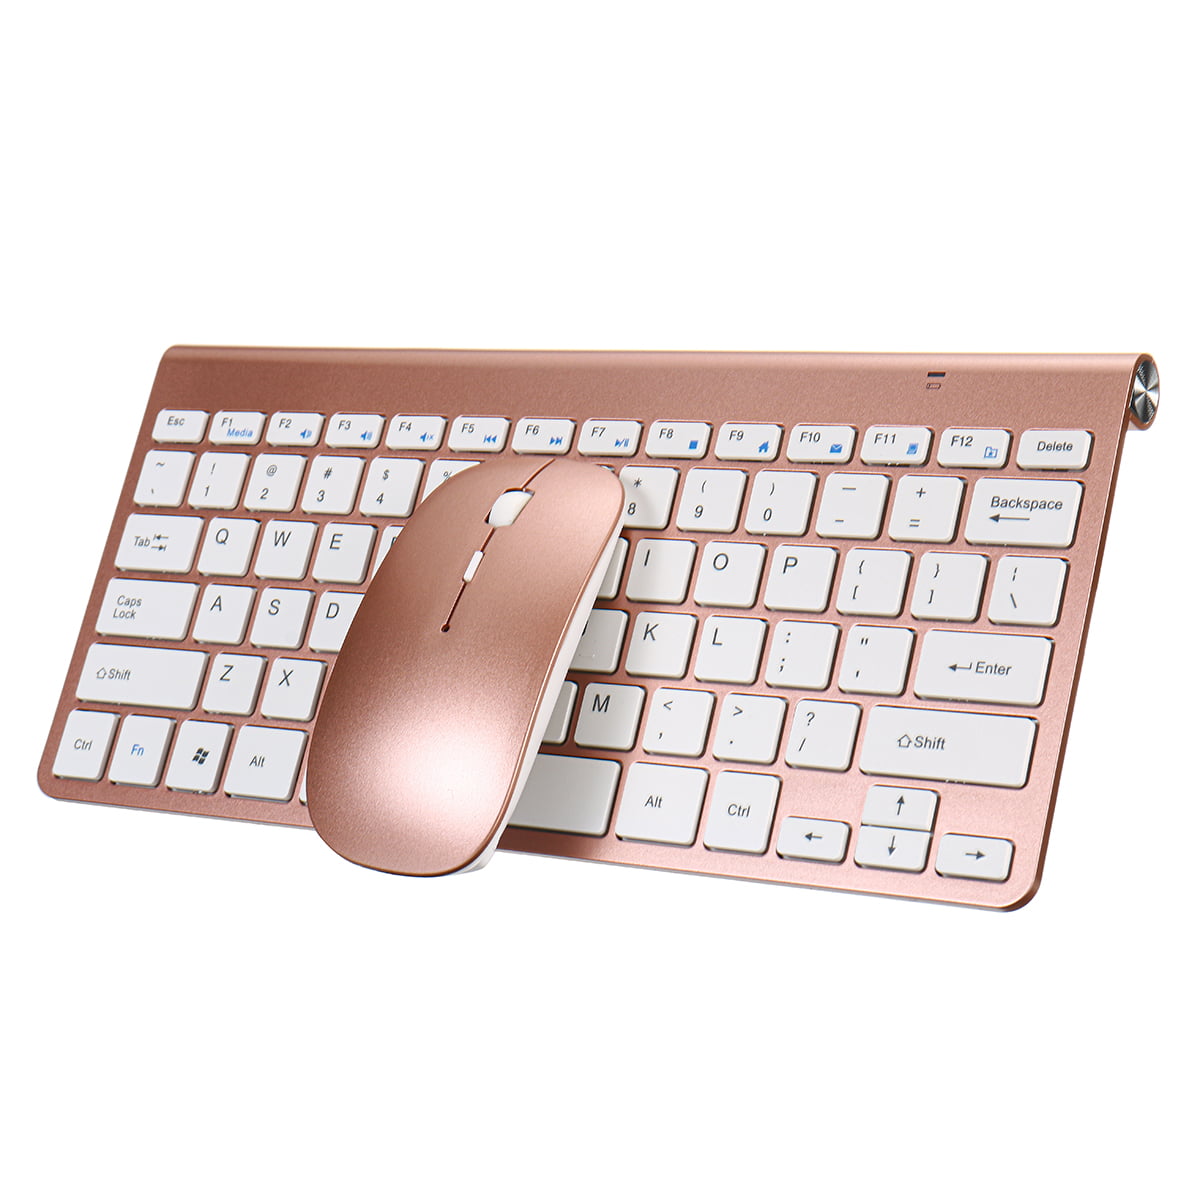 SMQHH Computer Keyboard and Mouse Combos Wired Keyboard and Mouse Thin Keyboard Mouse Combo Set for Notebook Laptop Mac Desktop PC TV Office Supplie 